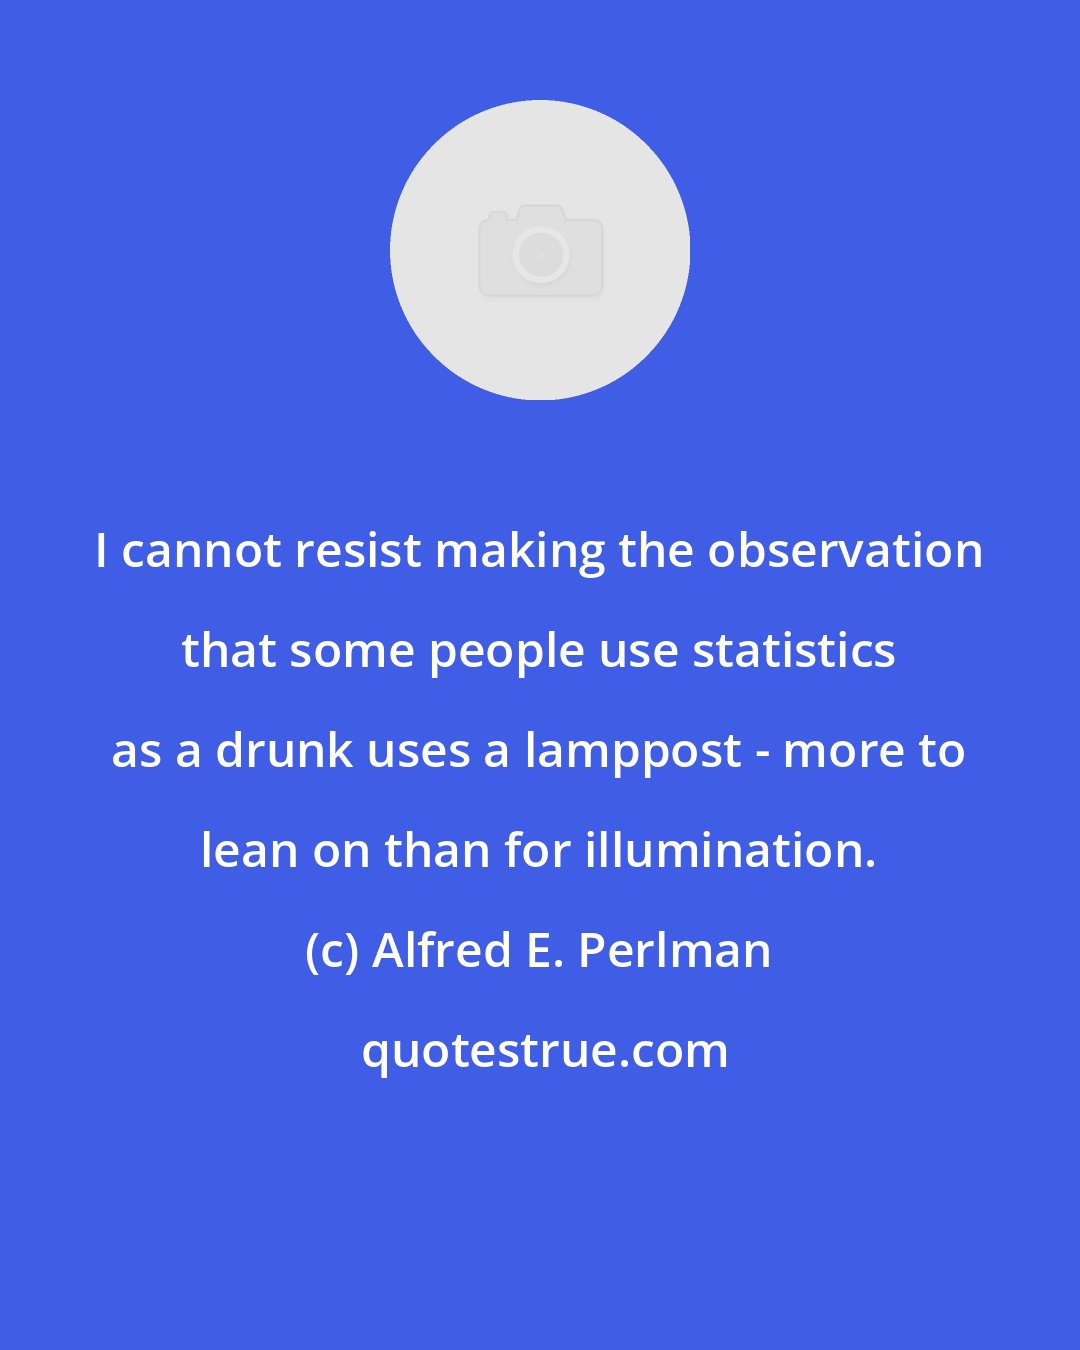 Alfred E. Perlman: I cannot resist making the observation that some people use statistics as a drunk uses a lamppost - more to lean on than for illumination.